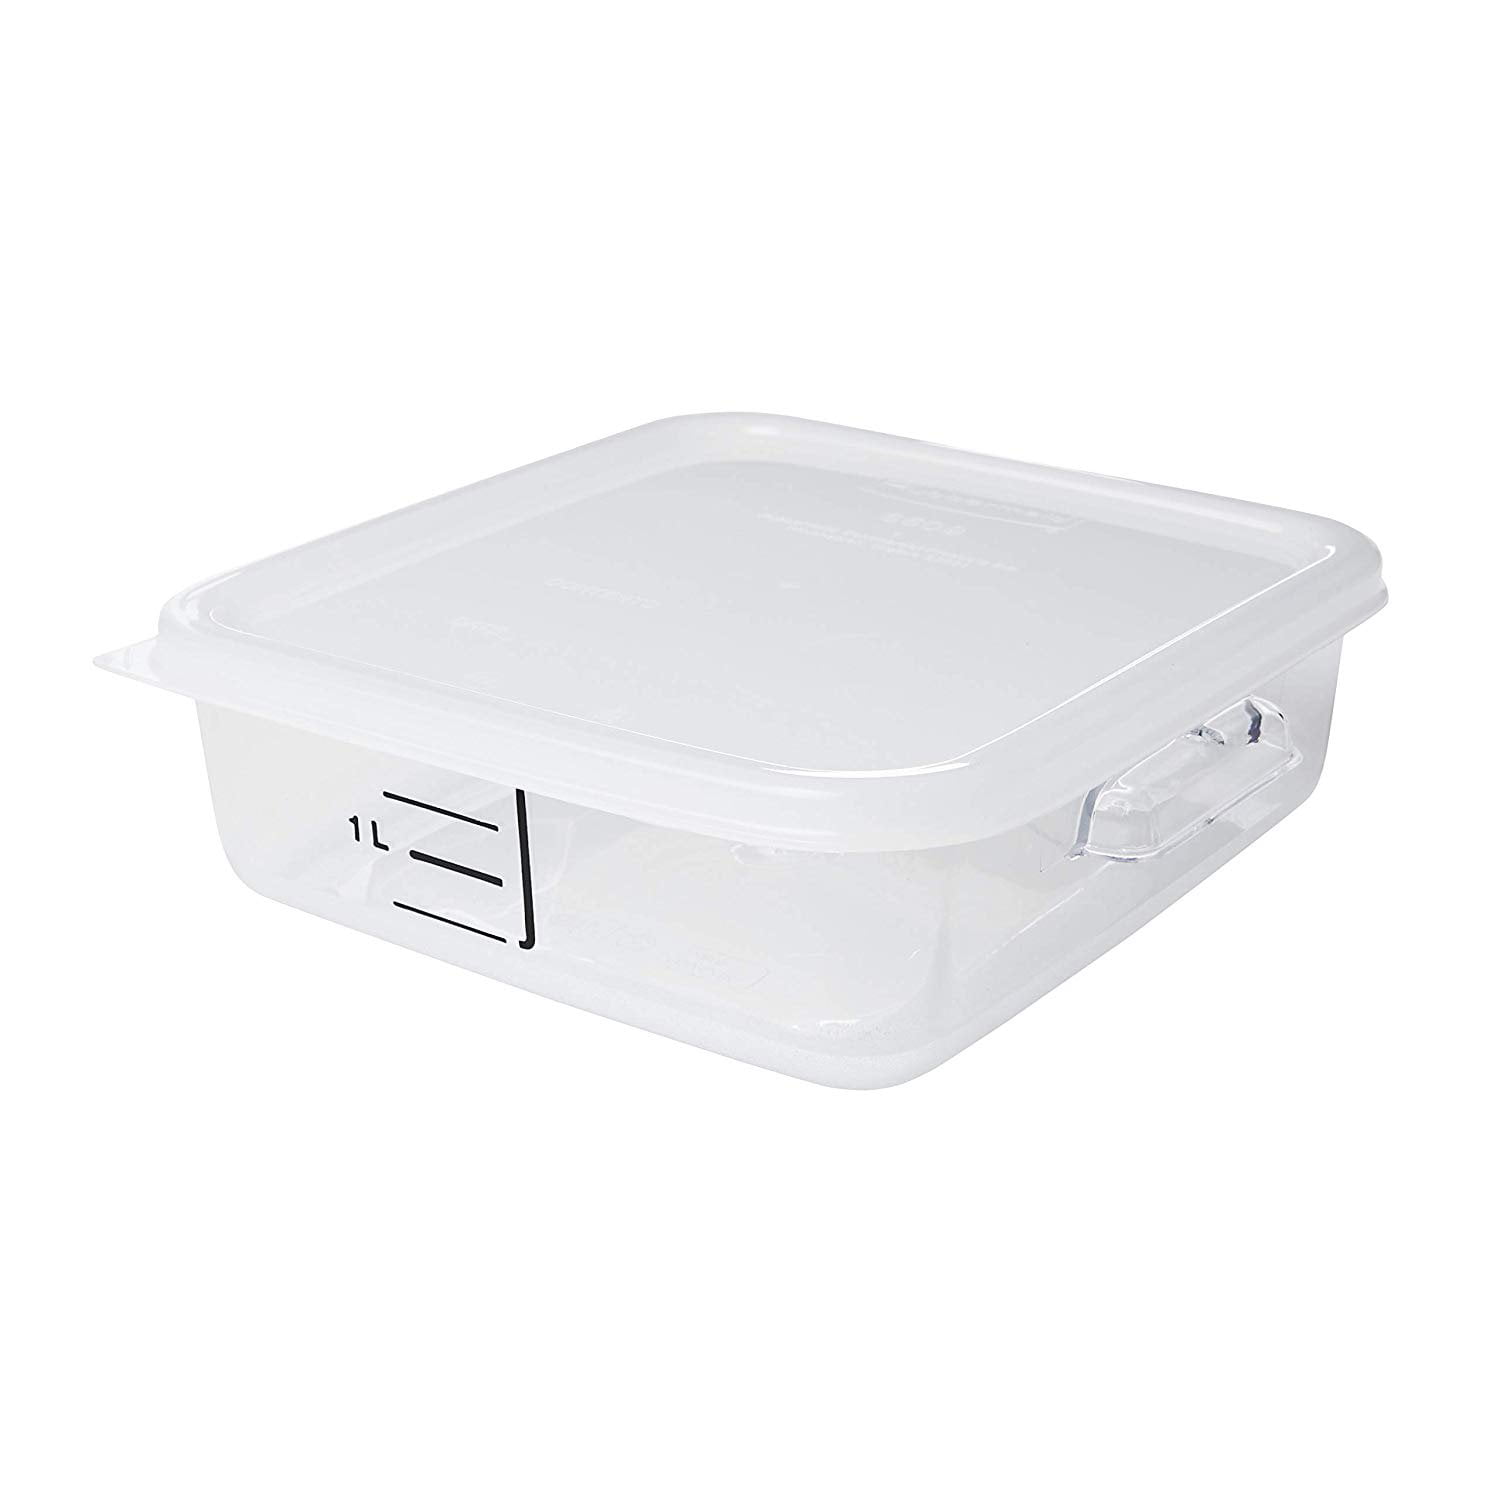 Market Source OnlineCommercial Food Storage Containers